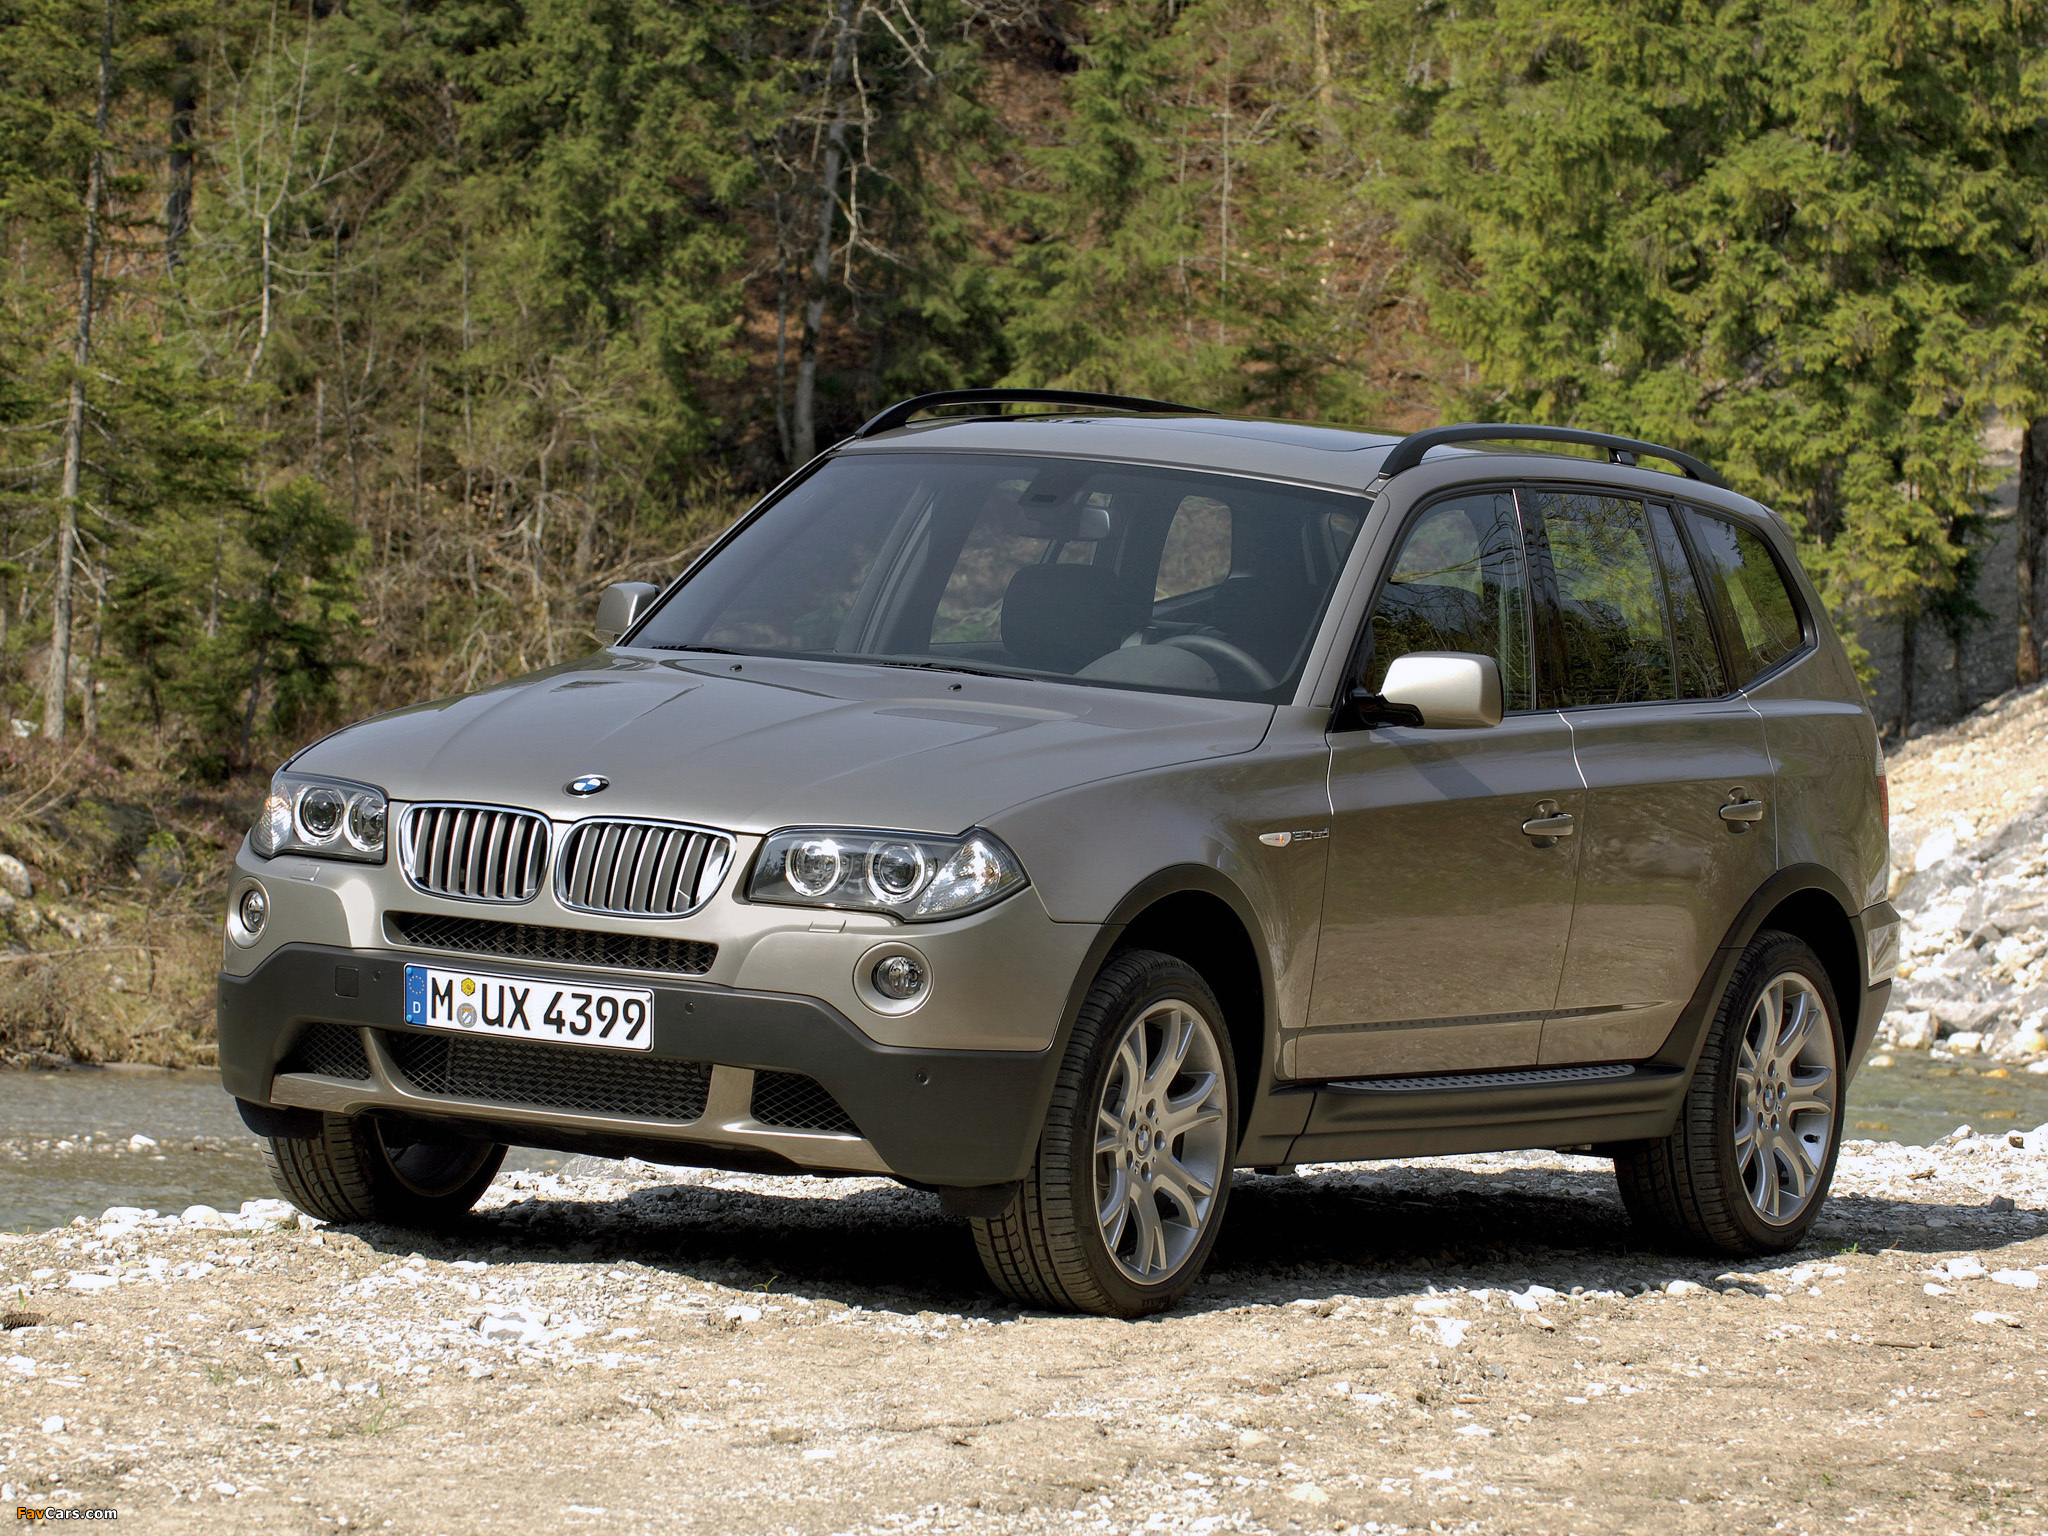 BMW X3 3.0sd (E83) 200710 pictures (2048x1536)